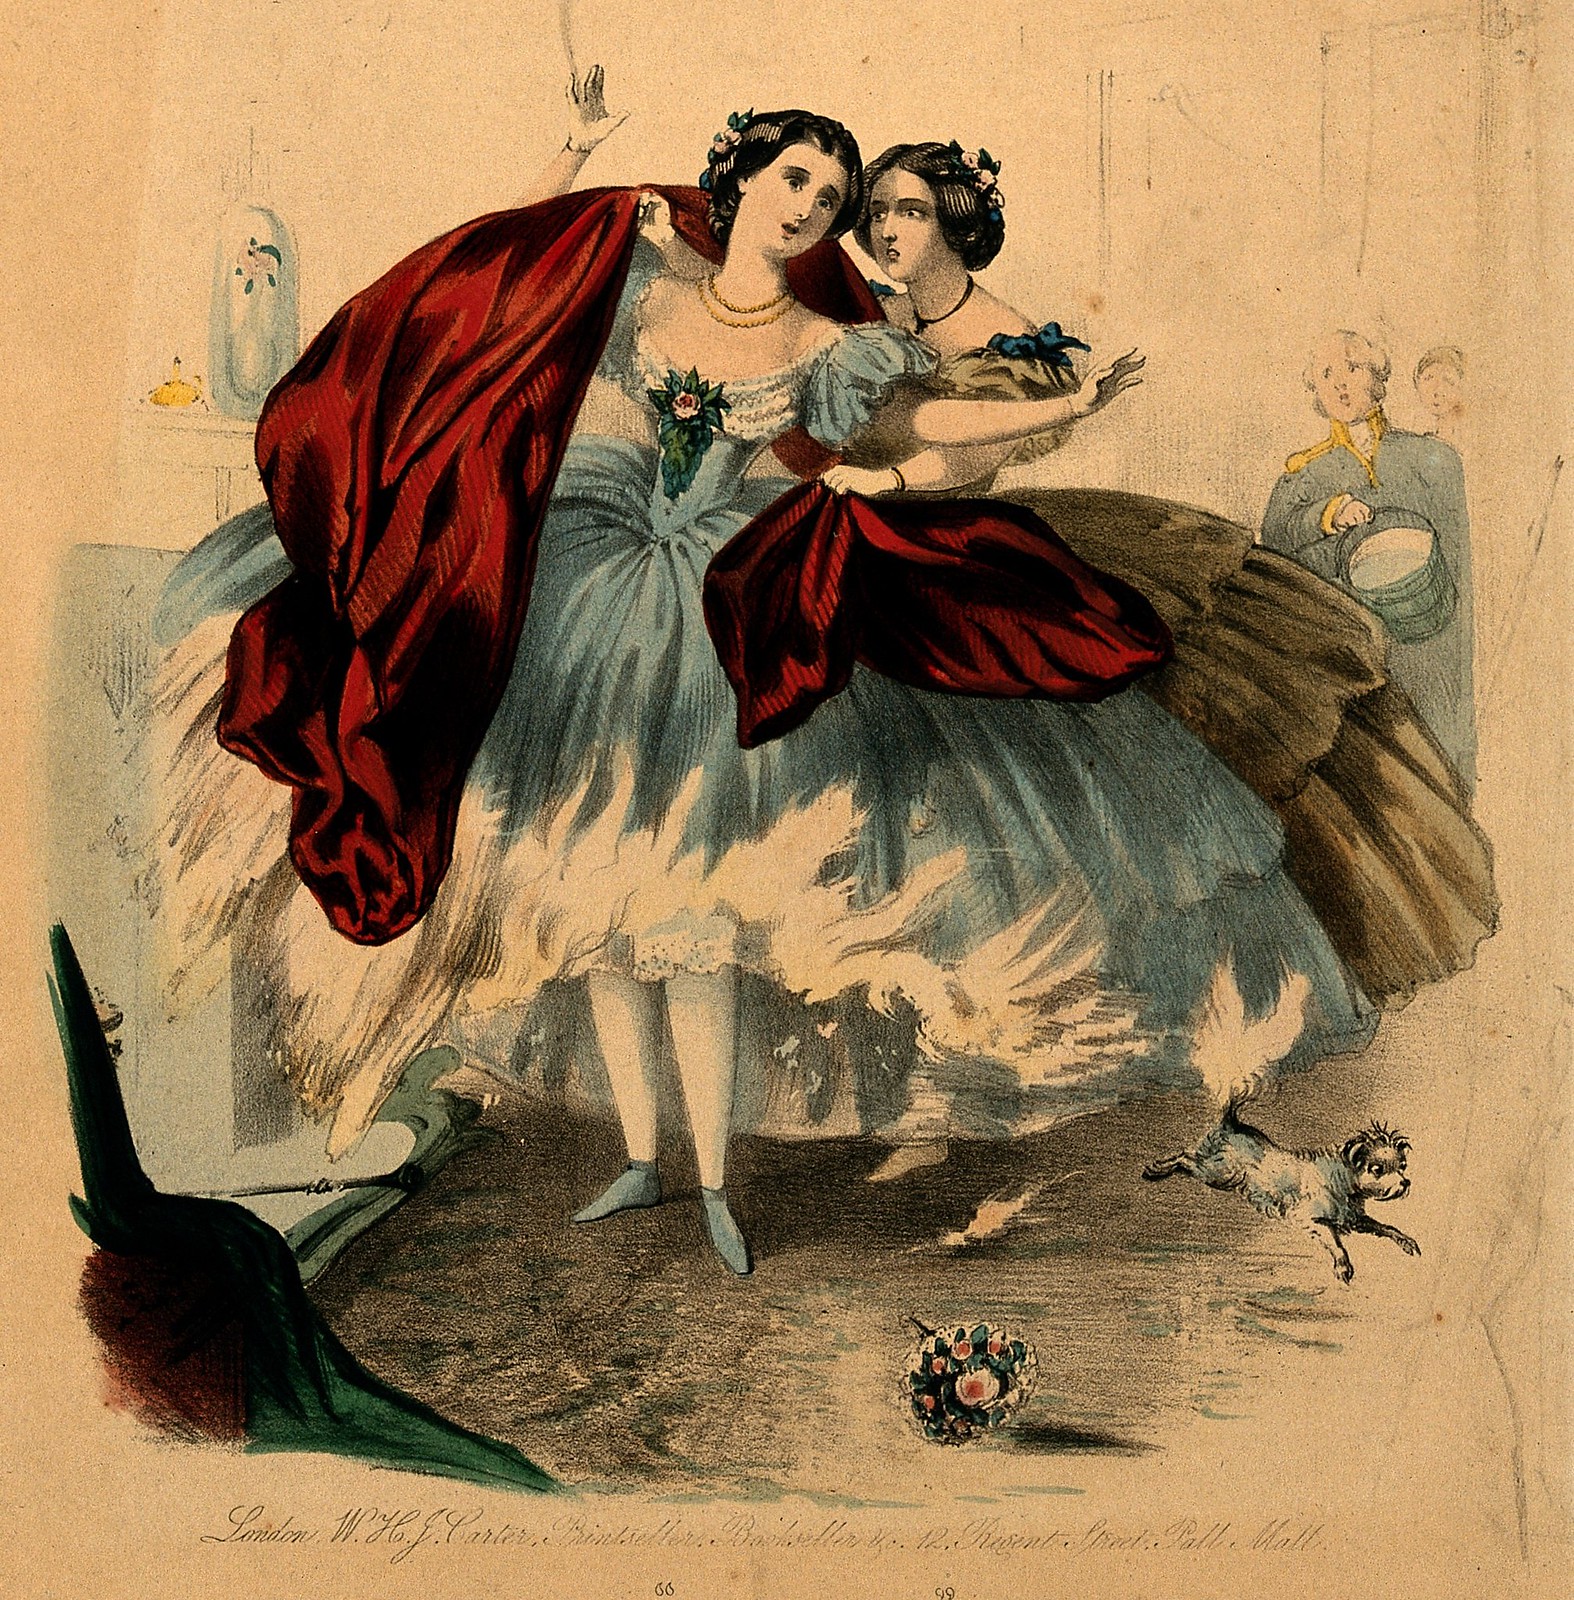 c. 1860. Women wearing crinolines which are set on fire by flames from a domestic fireplace.